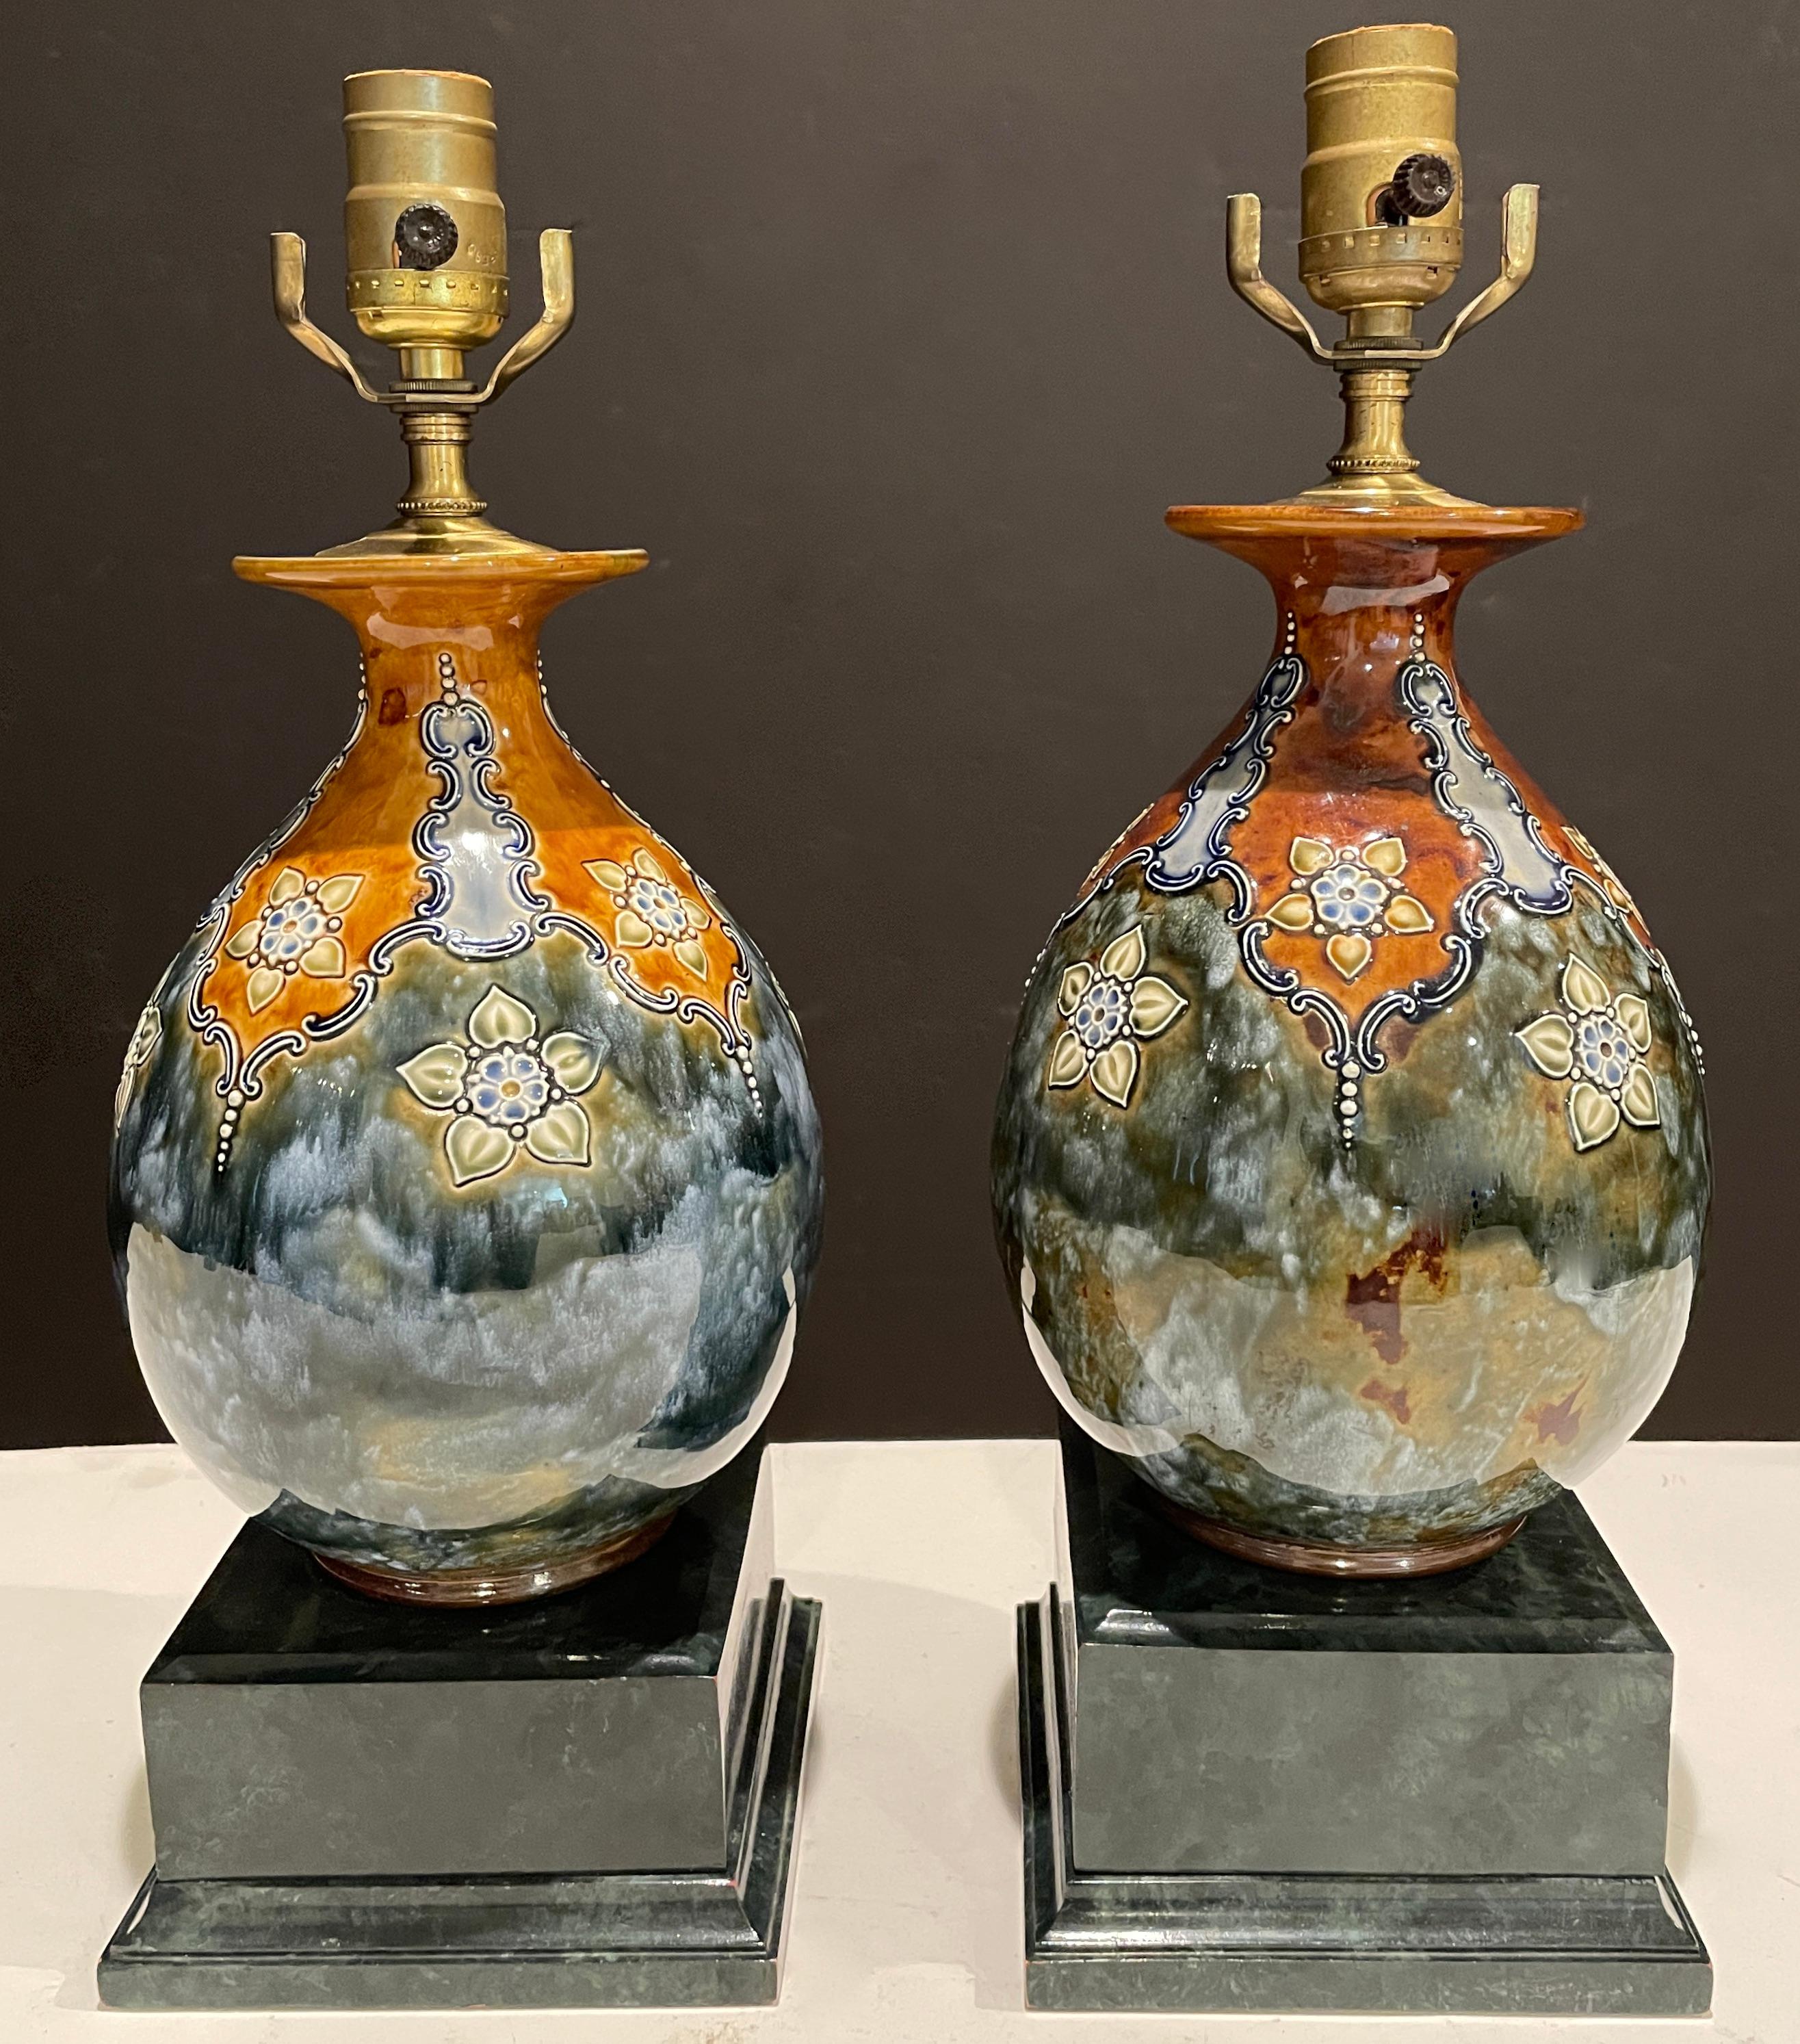 Pair of Royal Doulton Art Nouveau stoneware vases mounted as lamps. Exterior glazed in a blue grey ground with raised stylized floral decoration in greens and browns. Raised on marbleized square wood base.
24